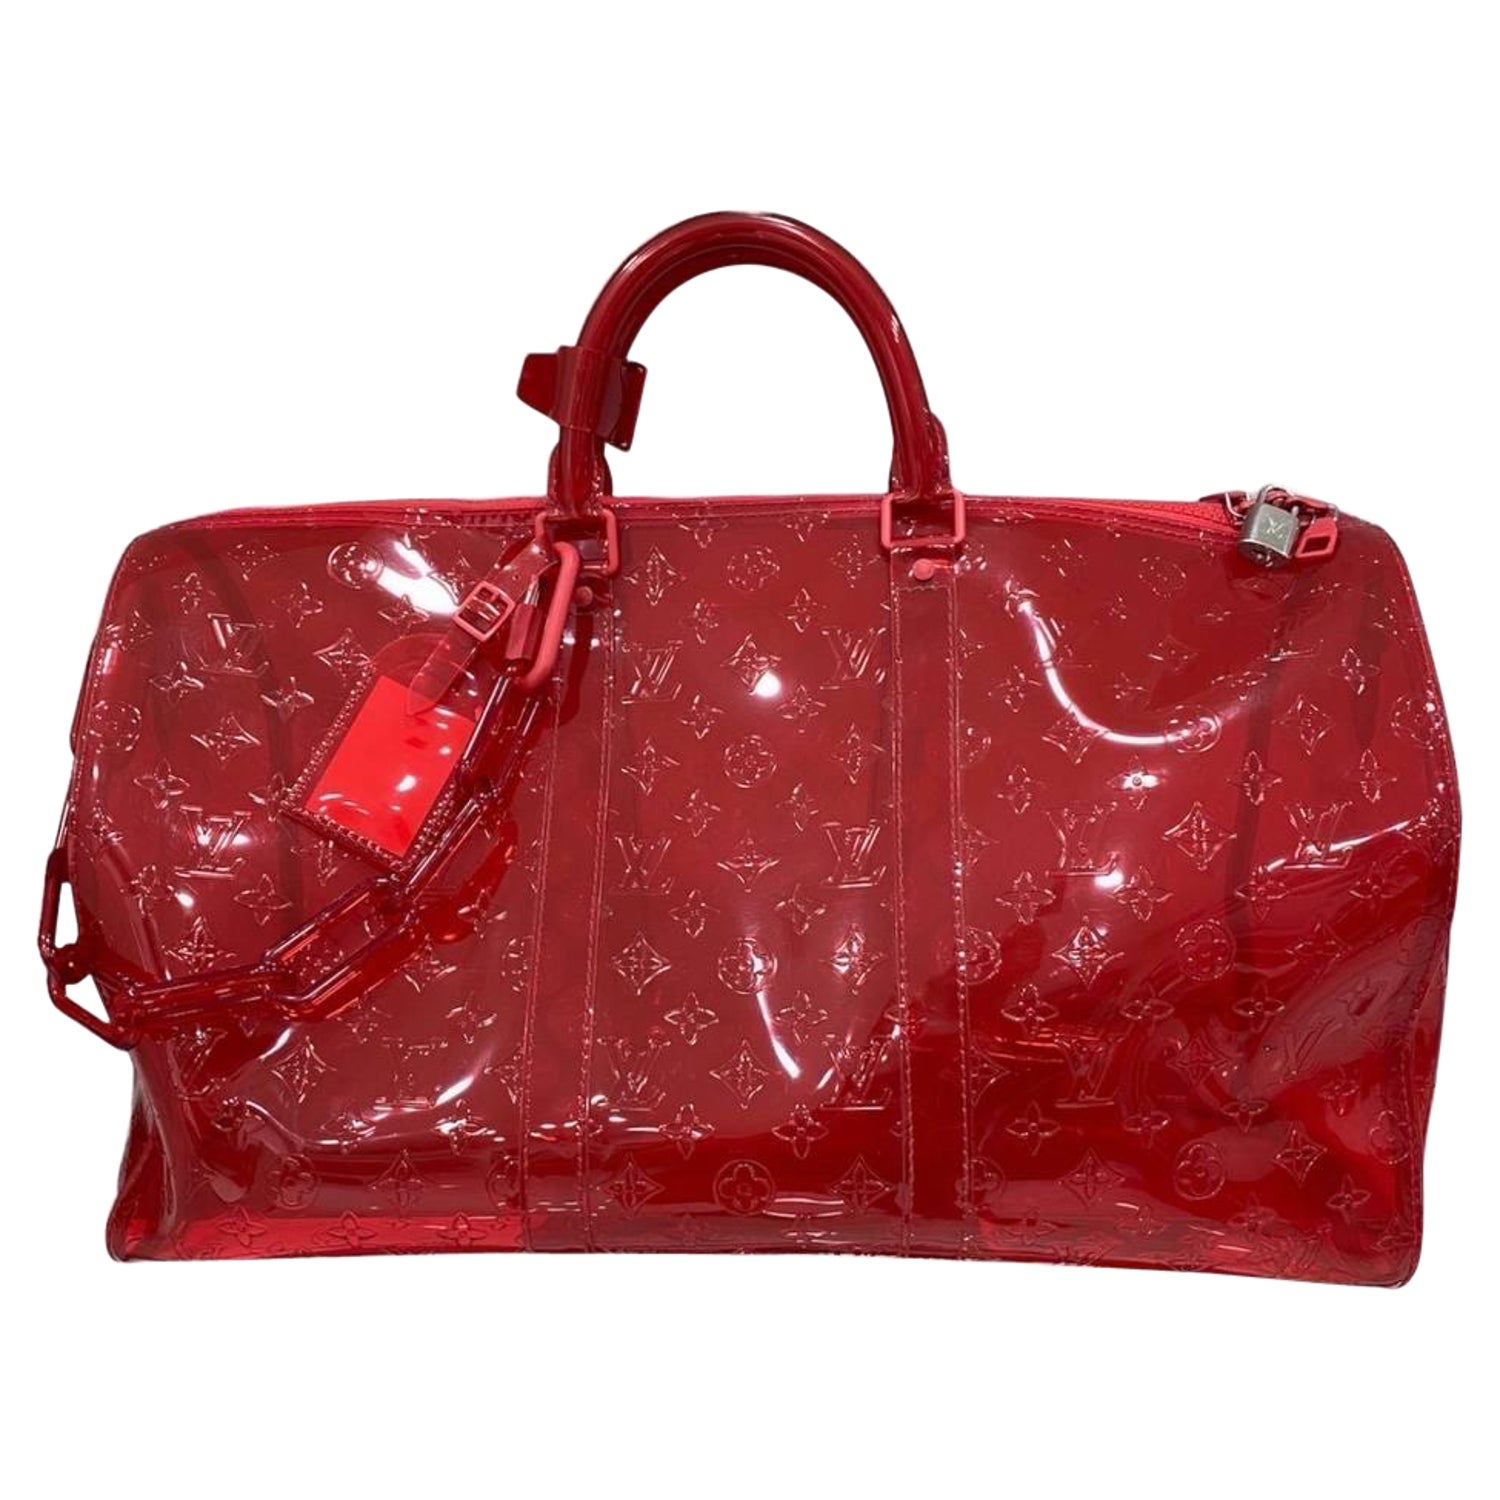 LOUIS VUITTON X SUPREME LIMITED EDITION RED EPI DUFFLE KEEPALL 45 -  CRTBLNCHSHP